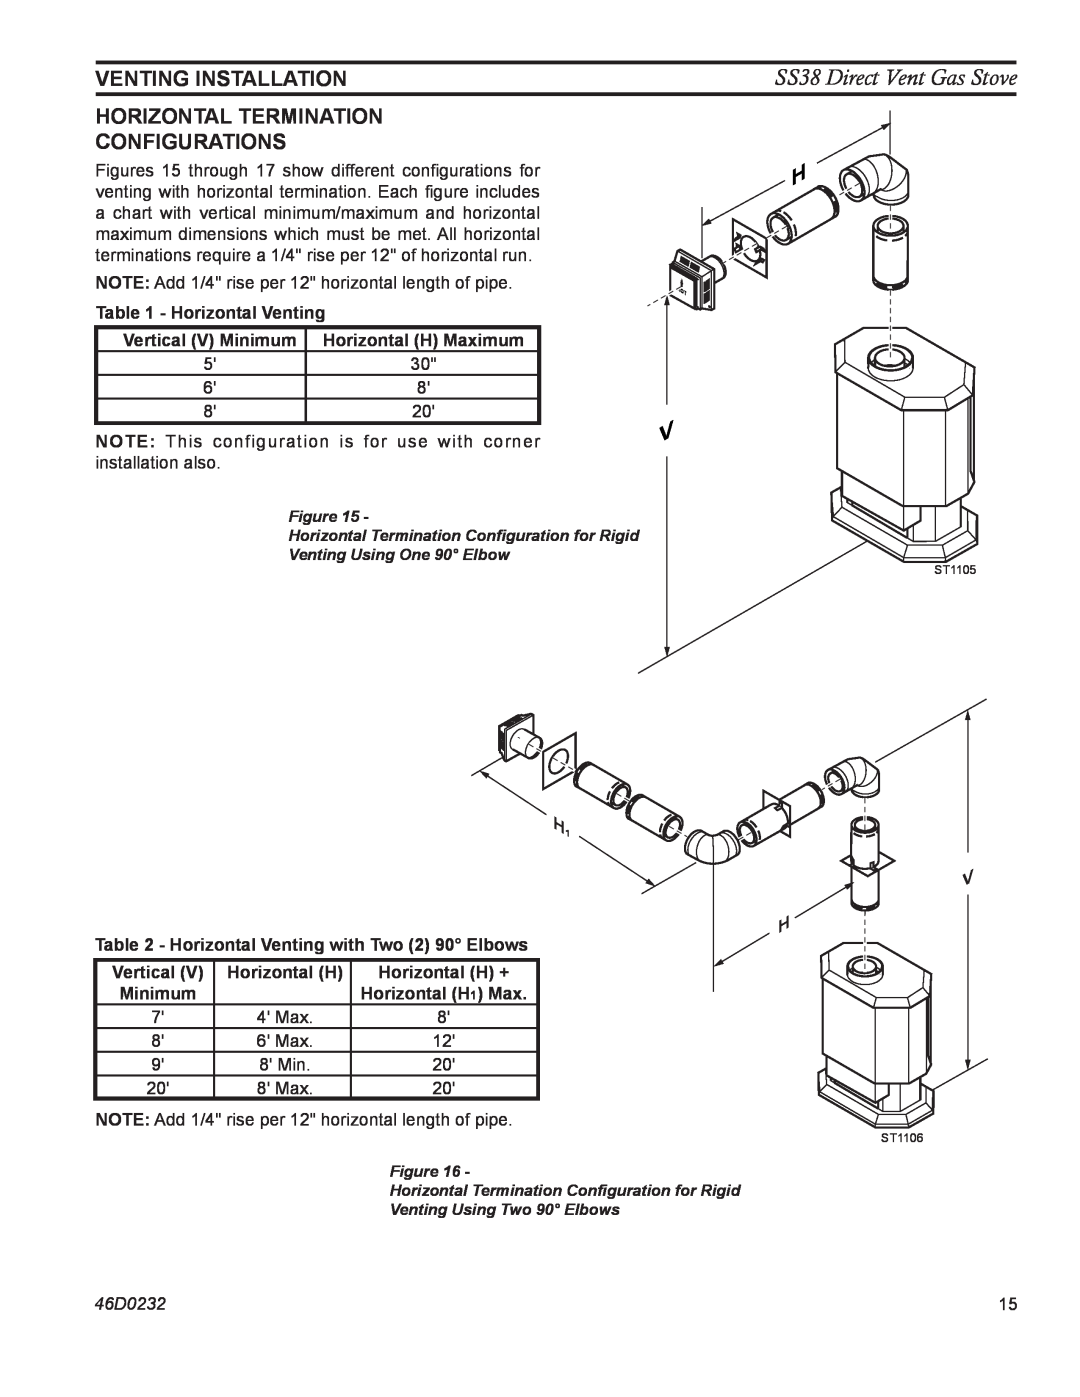 Monessen Hearth Horizontal termination configurations, SS38 Direct Vent Gas Stove, Venting Installation, 46D0232 